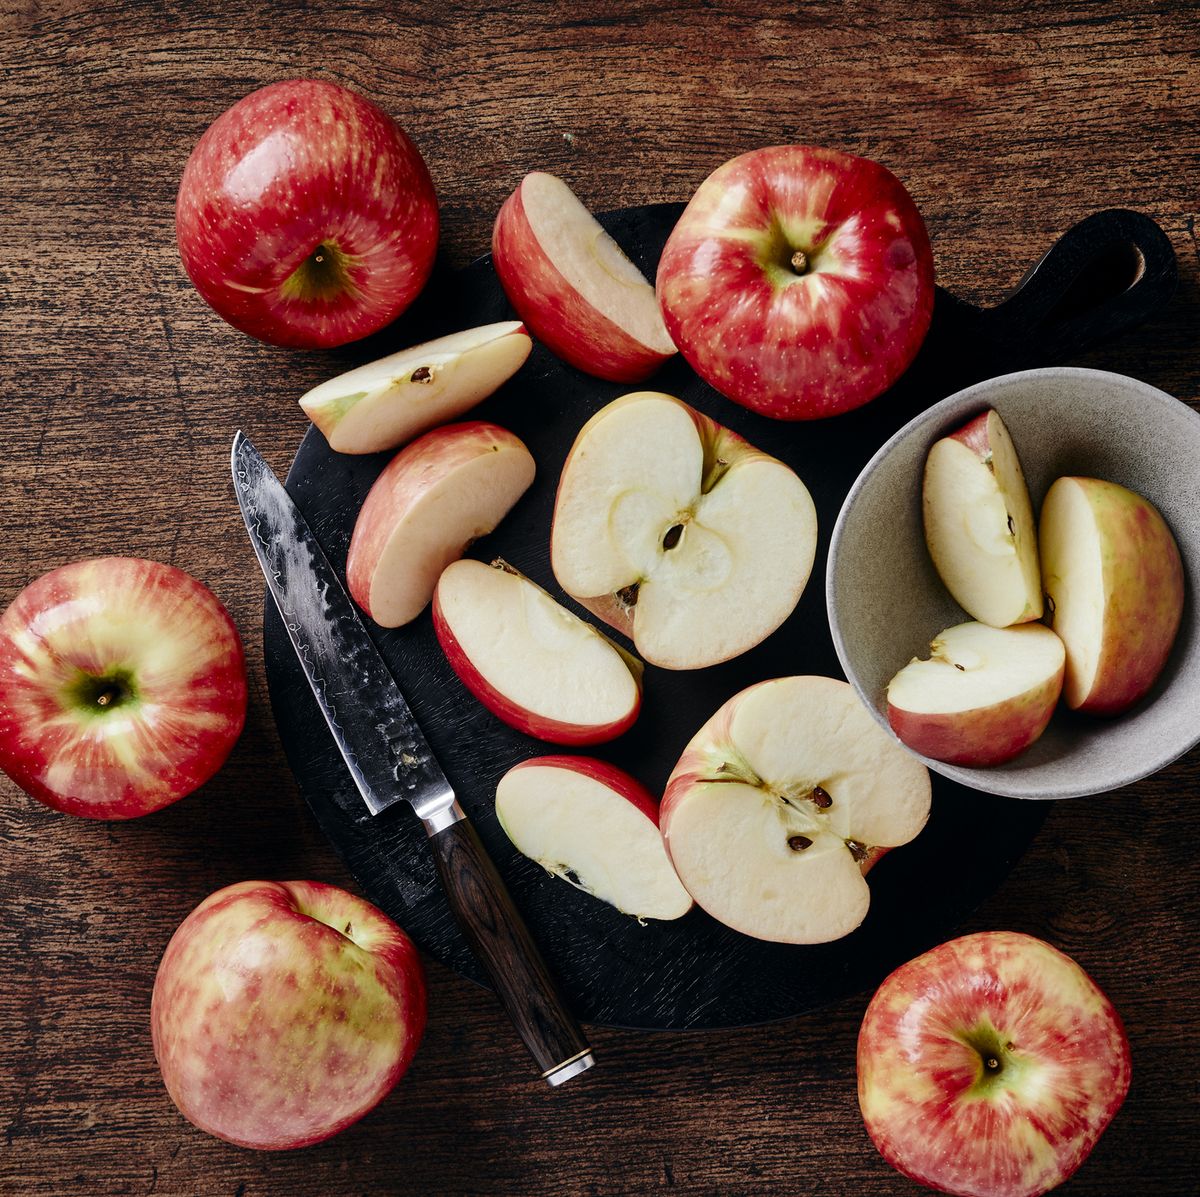 Should You Refrigerate Apples?